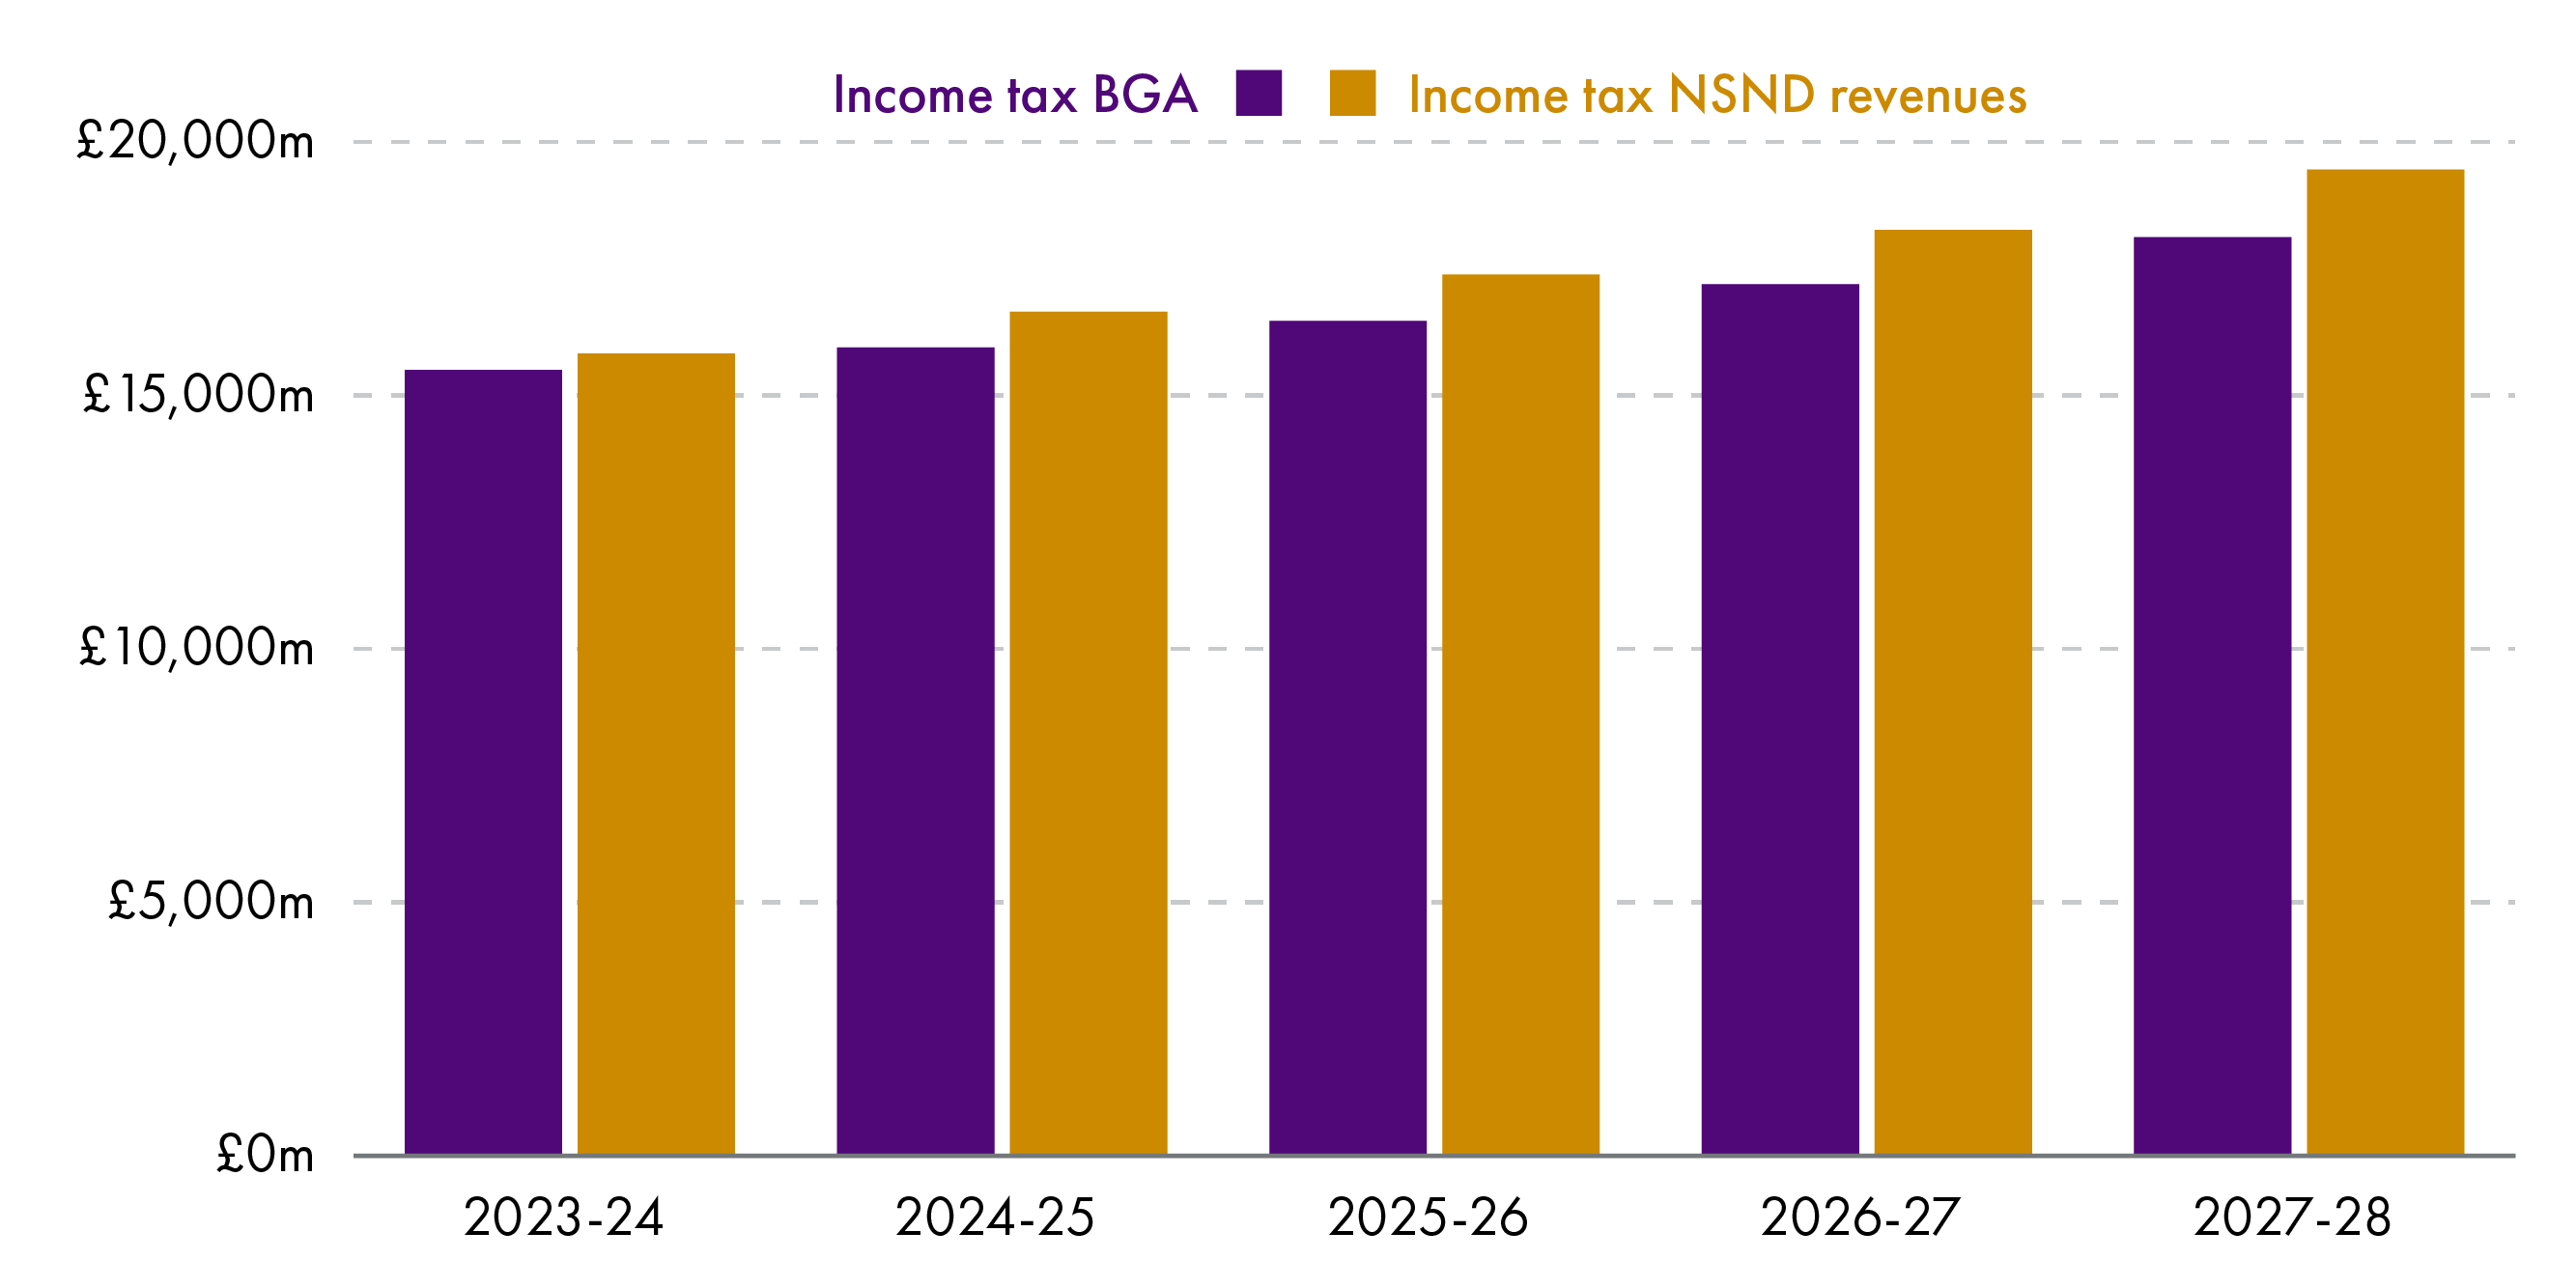 A bar chart showing Income tax BGA (in purple) against Income tax NSND revenues (in brown) from 2023-24 to 2027-28.